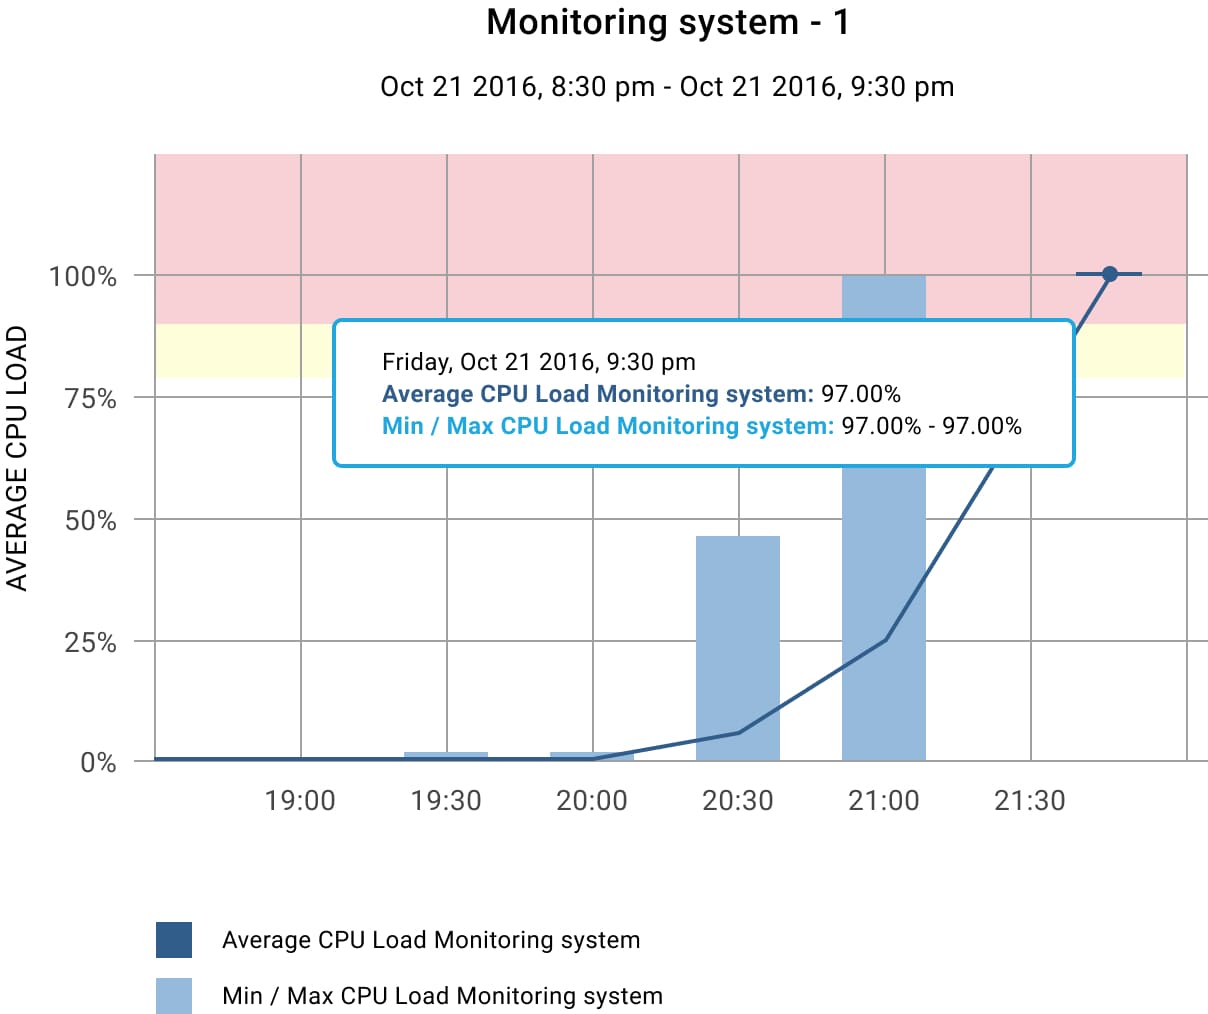 Demo project on monitoring system system